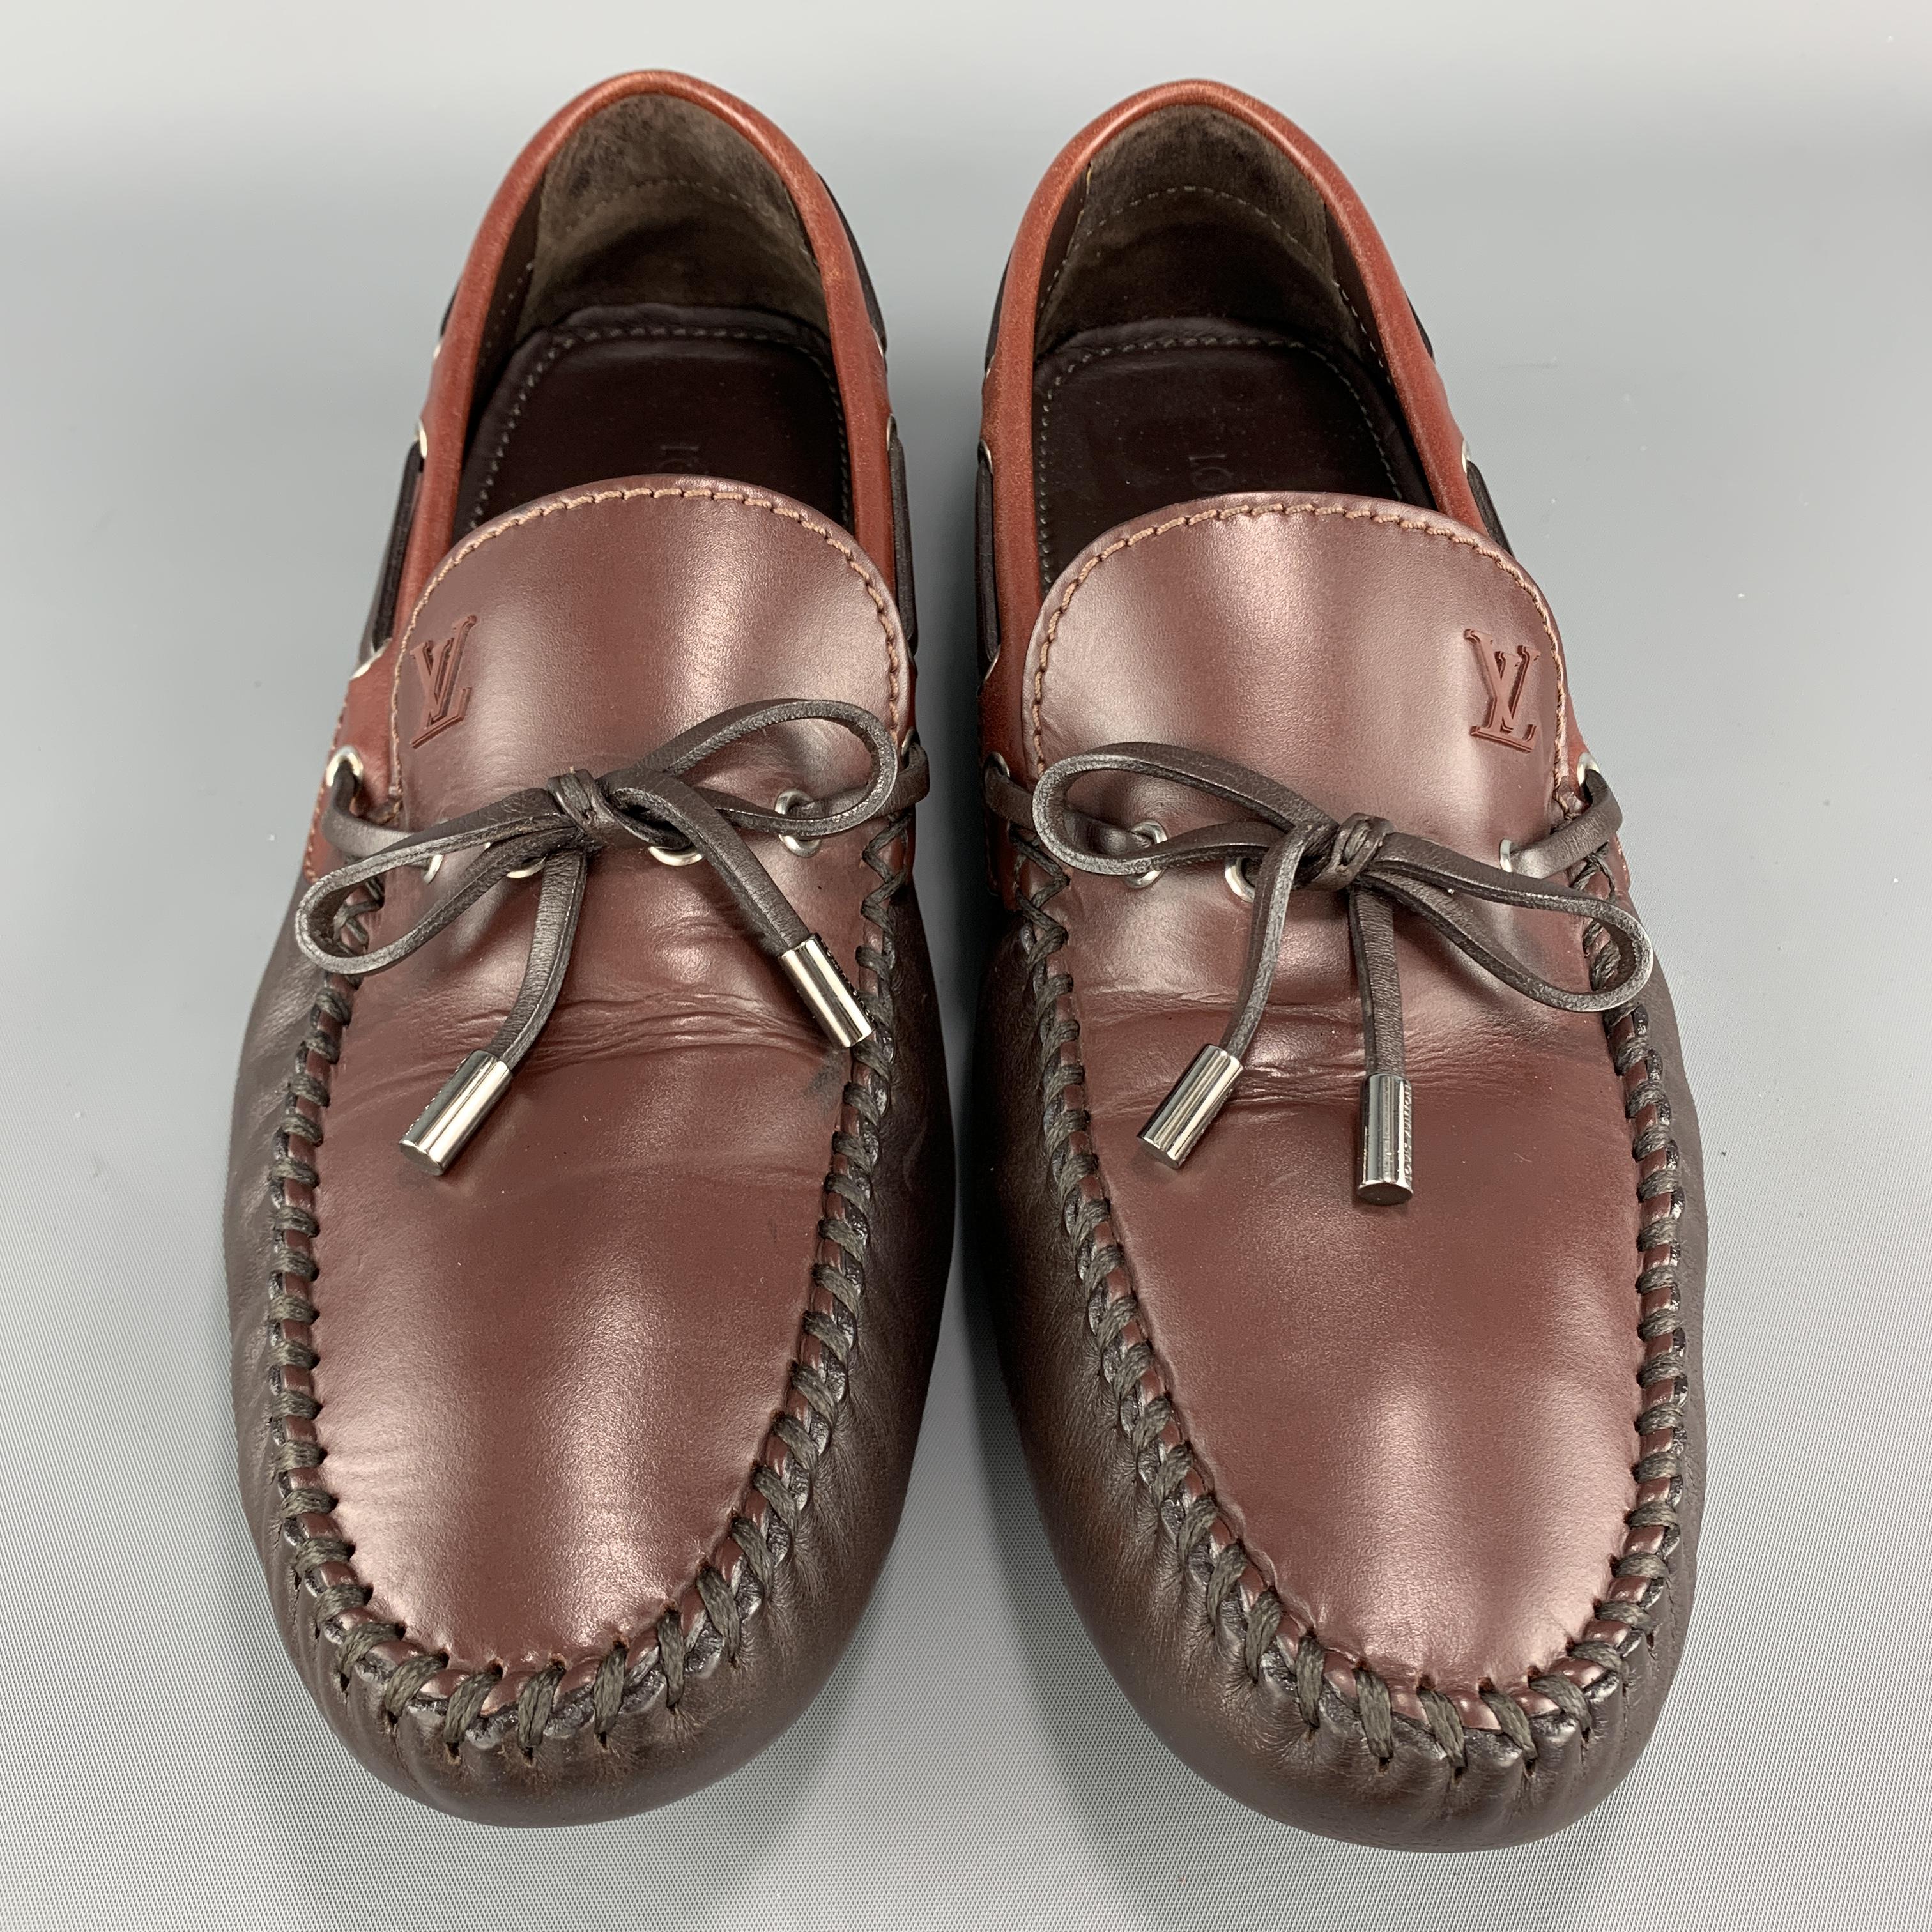 LOUIS VUITTON driver loafers come in color block leather in various tones of brown with a whipstitch apron toe, LV monogram tongue, driver sole, and woven grommet bow trim. Made in Italy.

Excellent Pre-Owned Condition.
Marked: UK 9.5

Outsole: